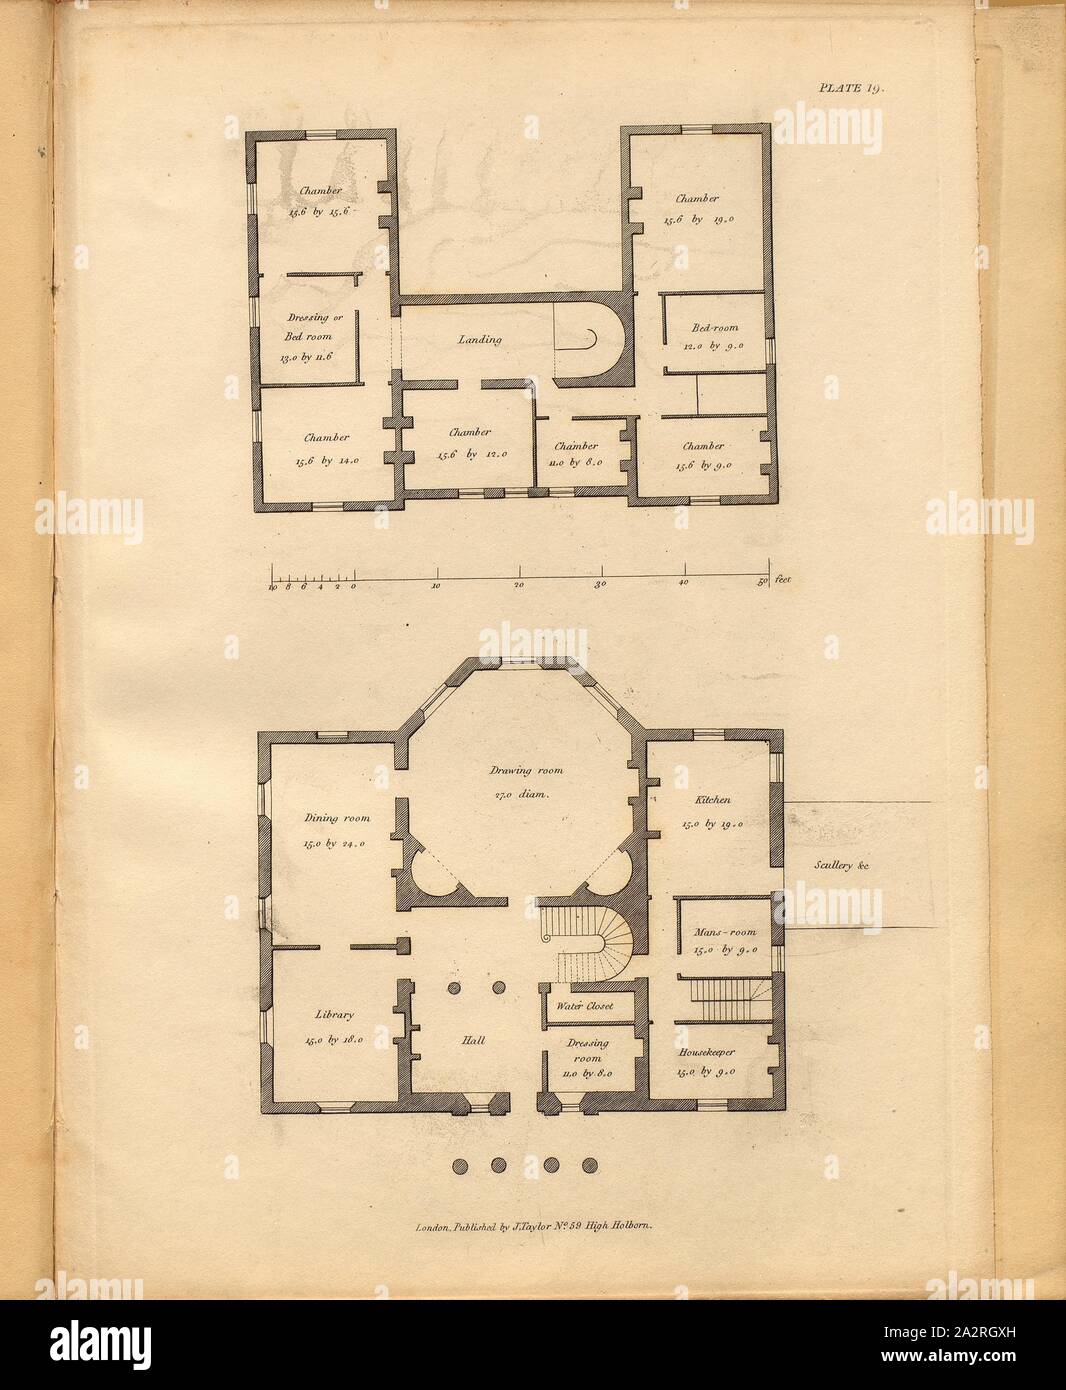 The Plan of a considerable Villa, Floor plan of a villa, Plate 19, to p. 23, 1835, Edmund Aikin: Designs for villas and other rural buildings ...: together with a memoir of the author and an introductory essay, containing remarks on the defects of modern architecture, and an investigation of the style best adapted for the dwellings of present times. London: Weale. 1835 Stock Photo